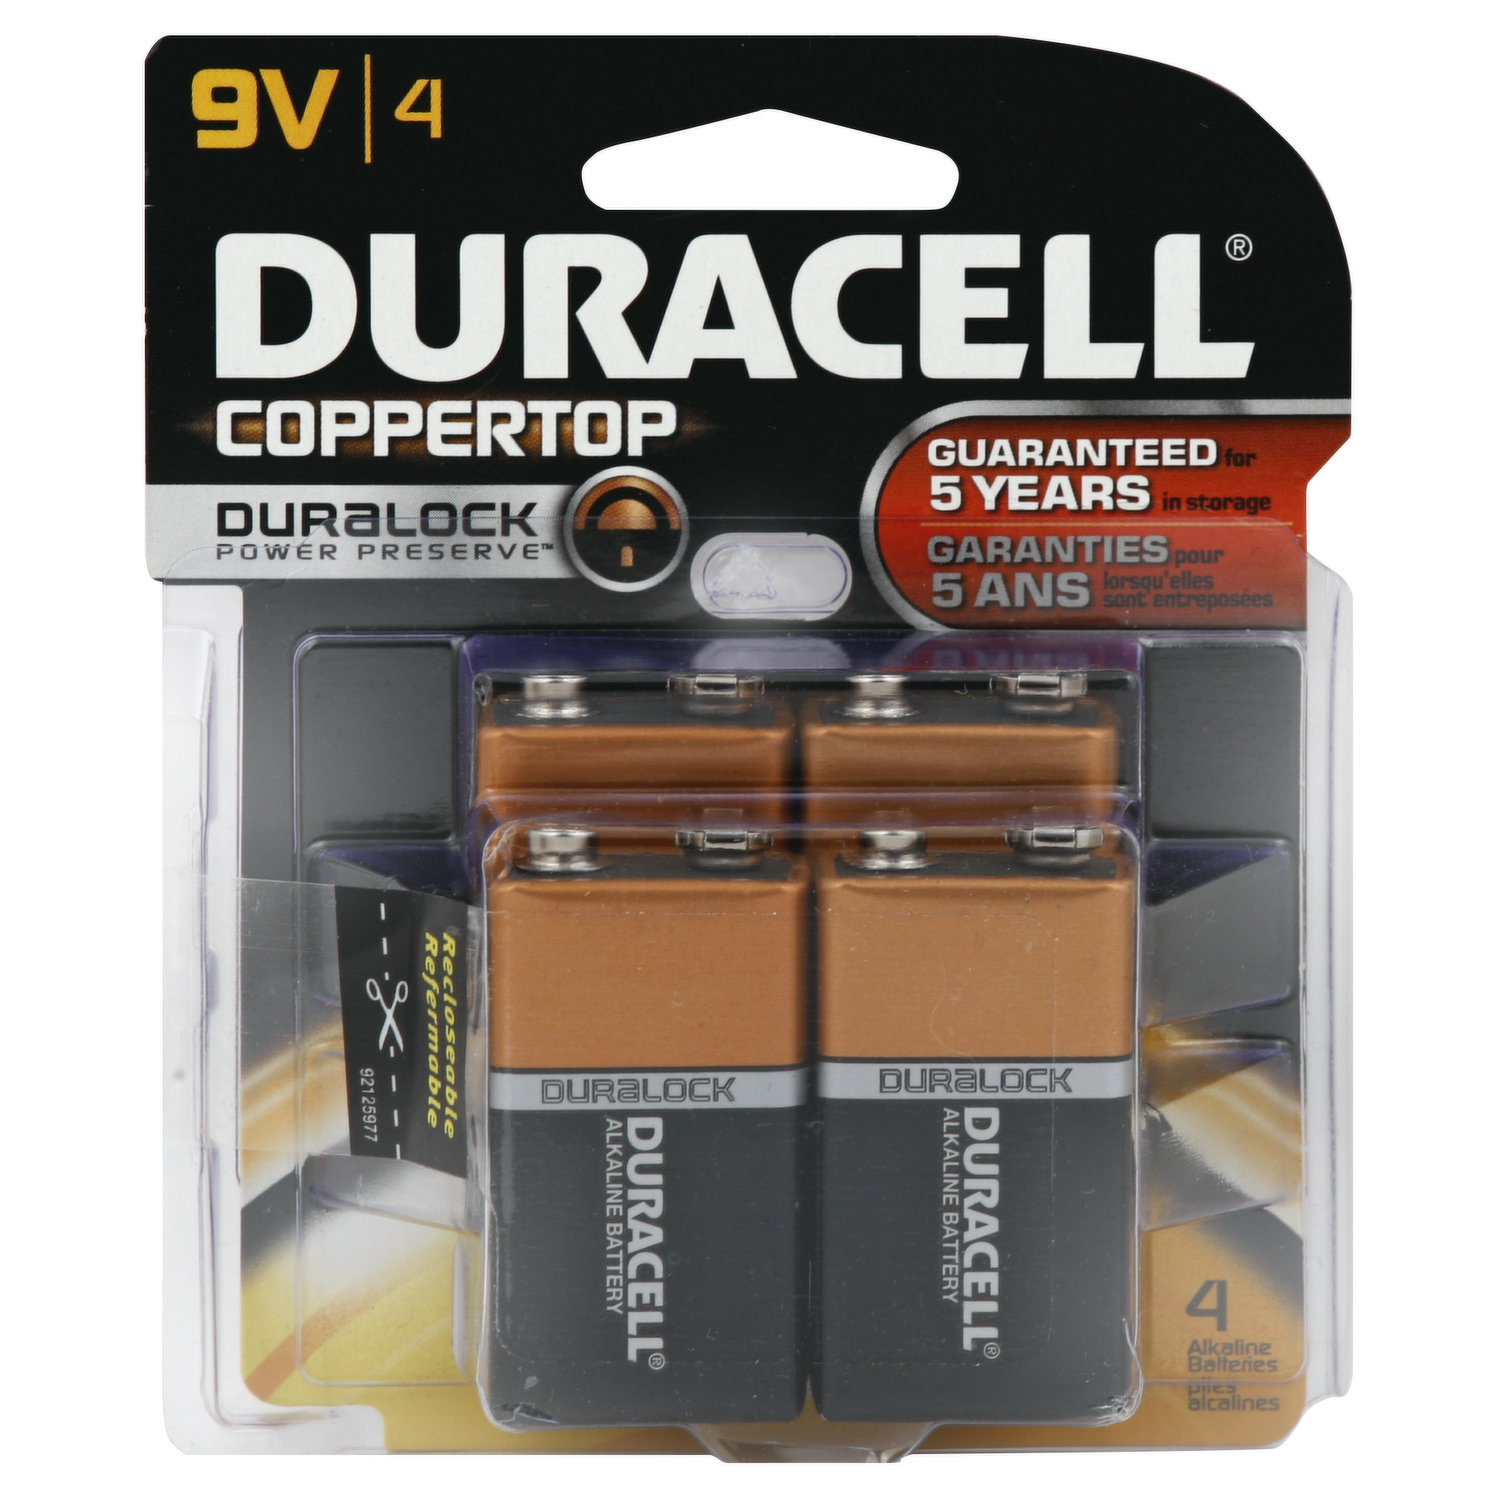 Duracell Home Ecosystem Battery: The Complete Review